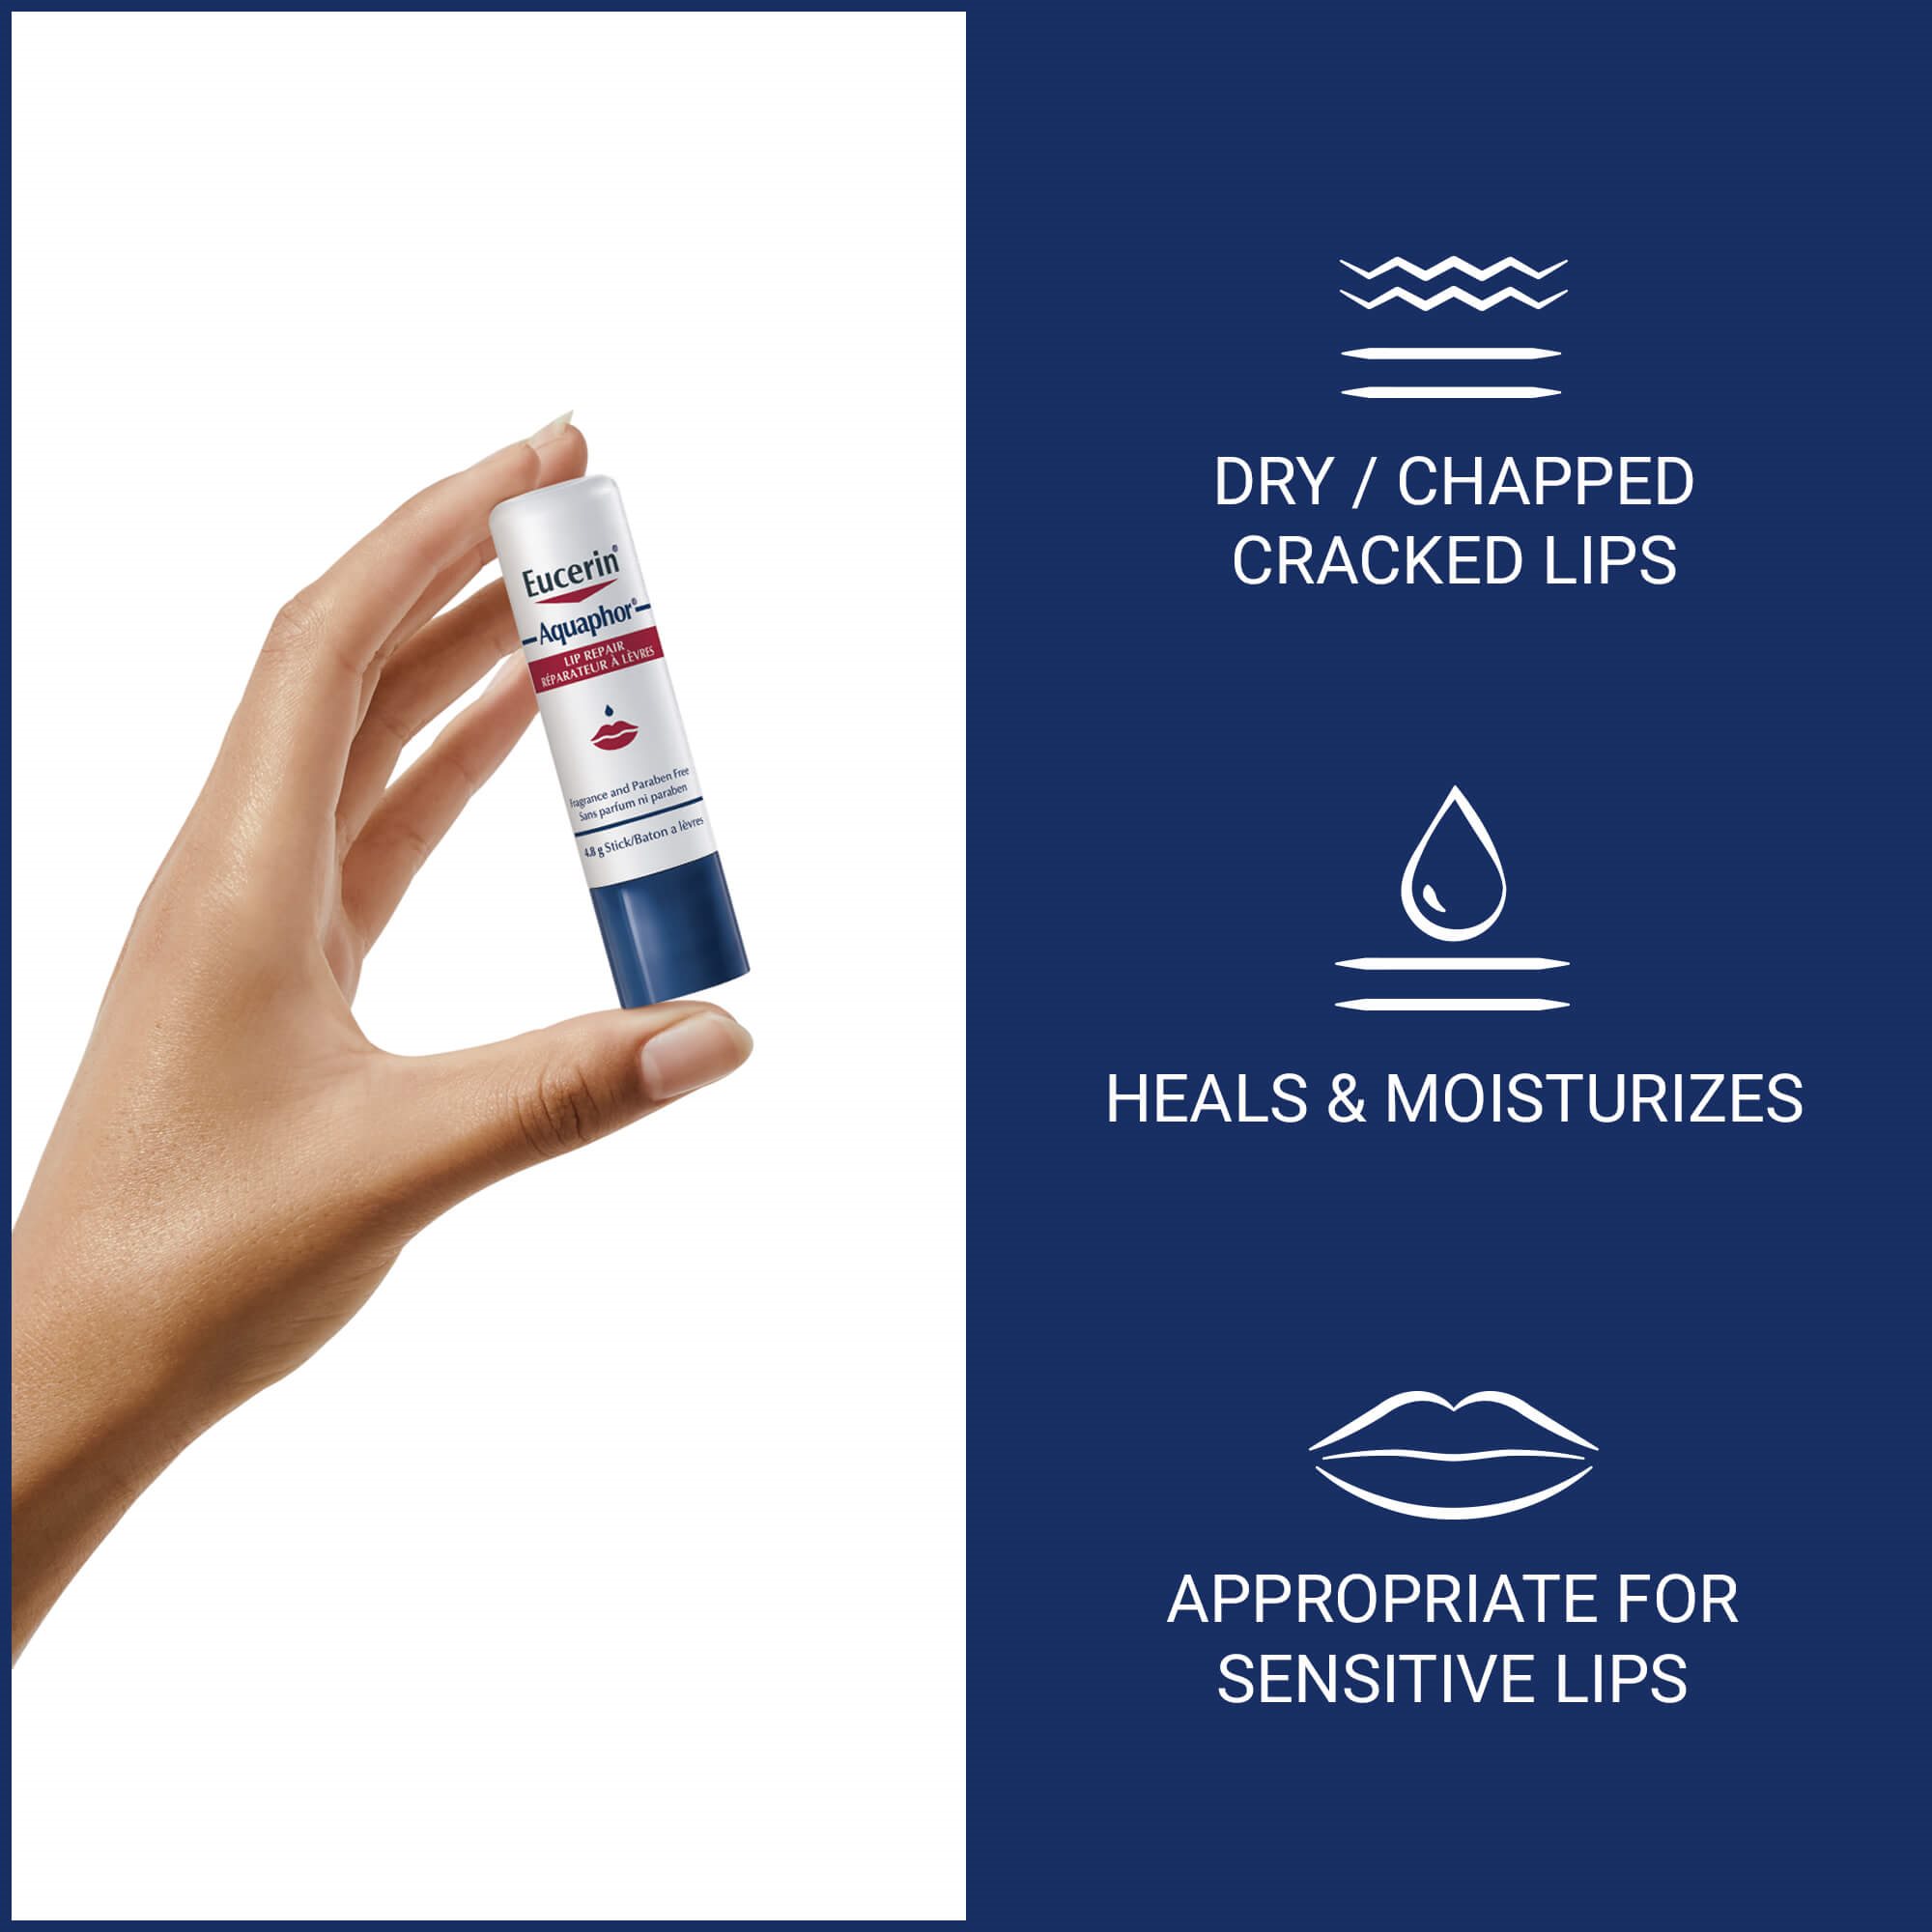 View of Aquaphor lip repair product being held in hand with benefits.